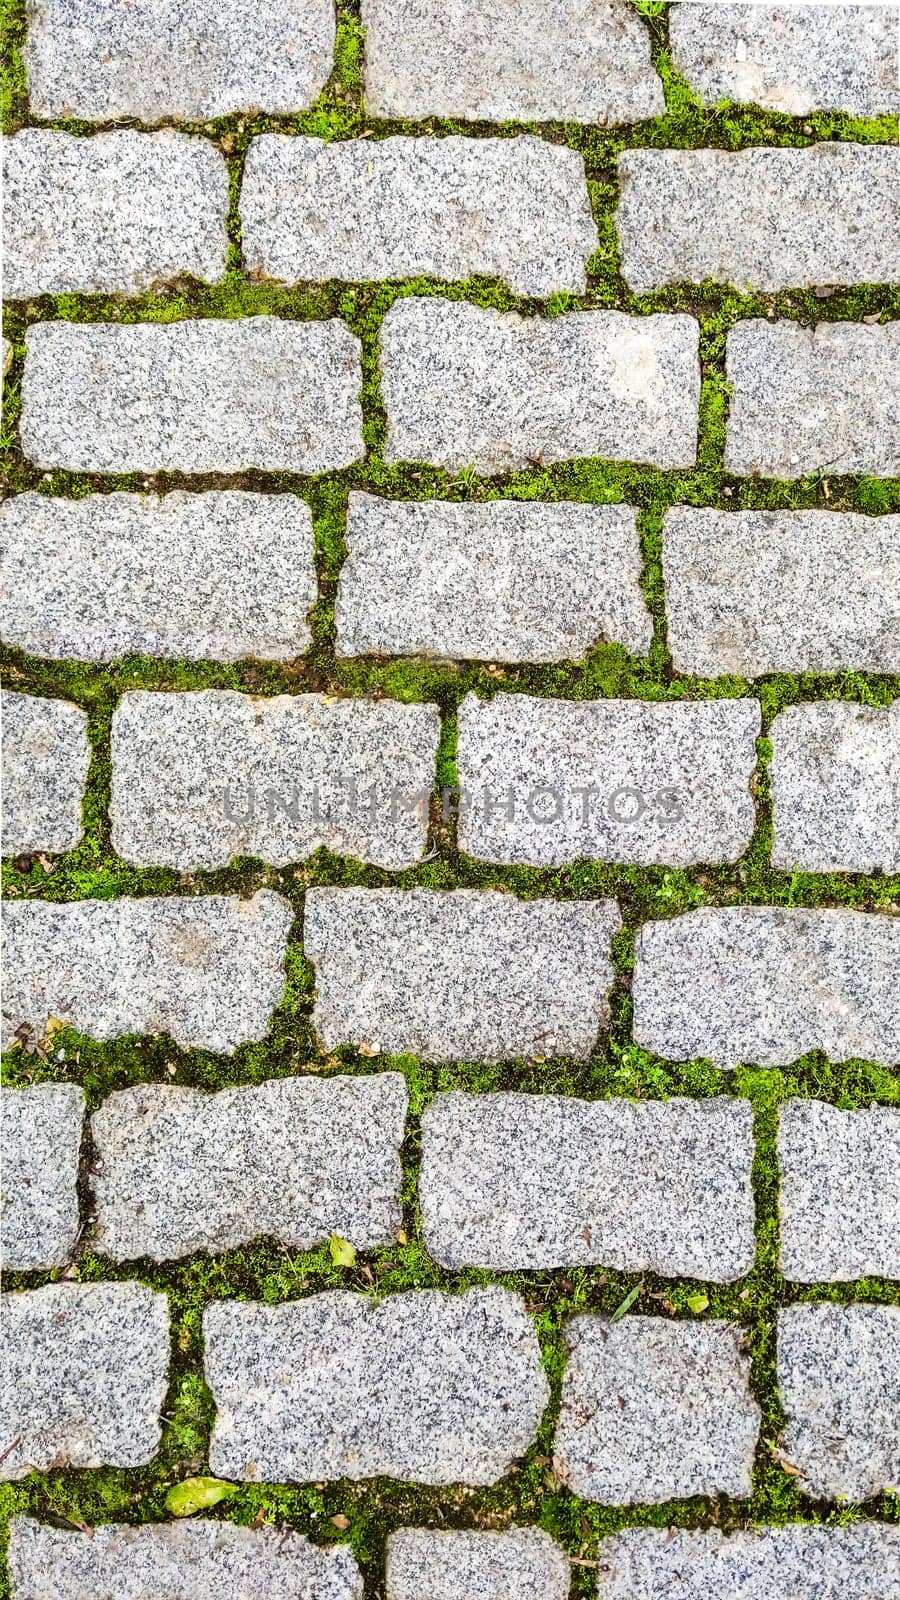 Texture of green grass sprouted between bricks of cobblestone path, top view. Concept of harmonious fusion of city and nature